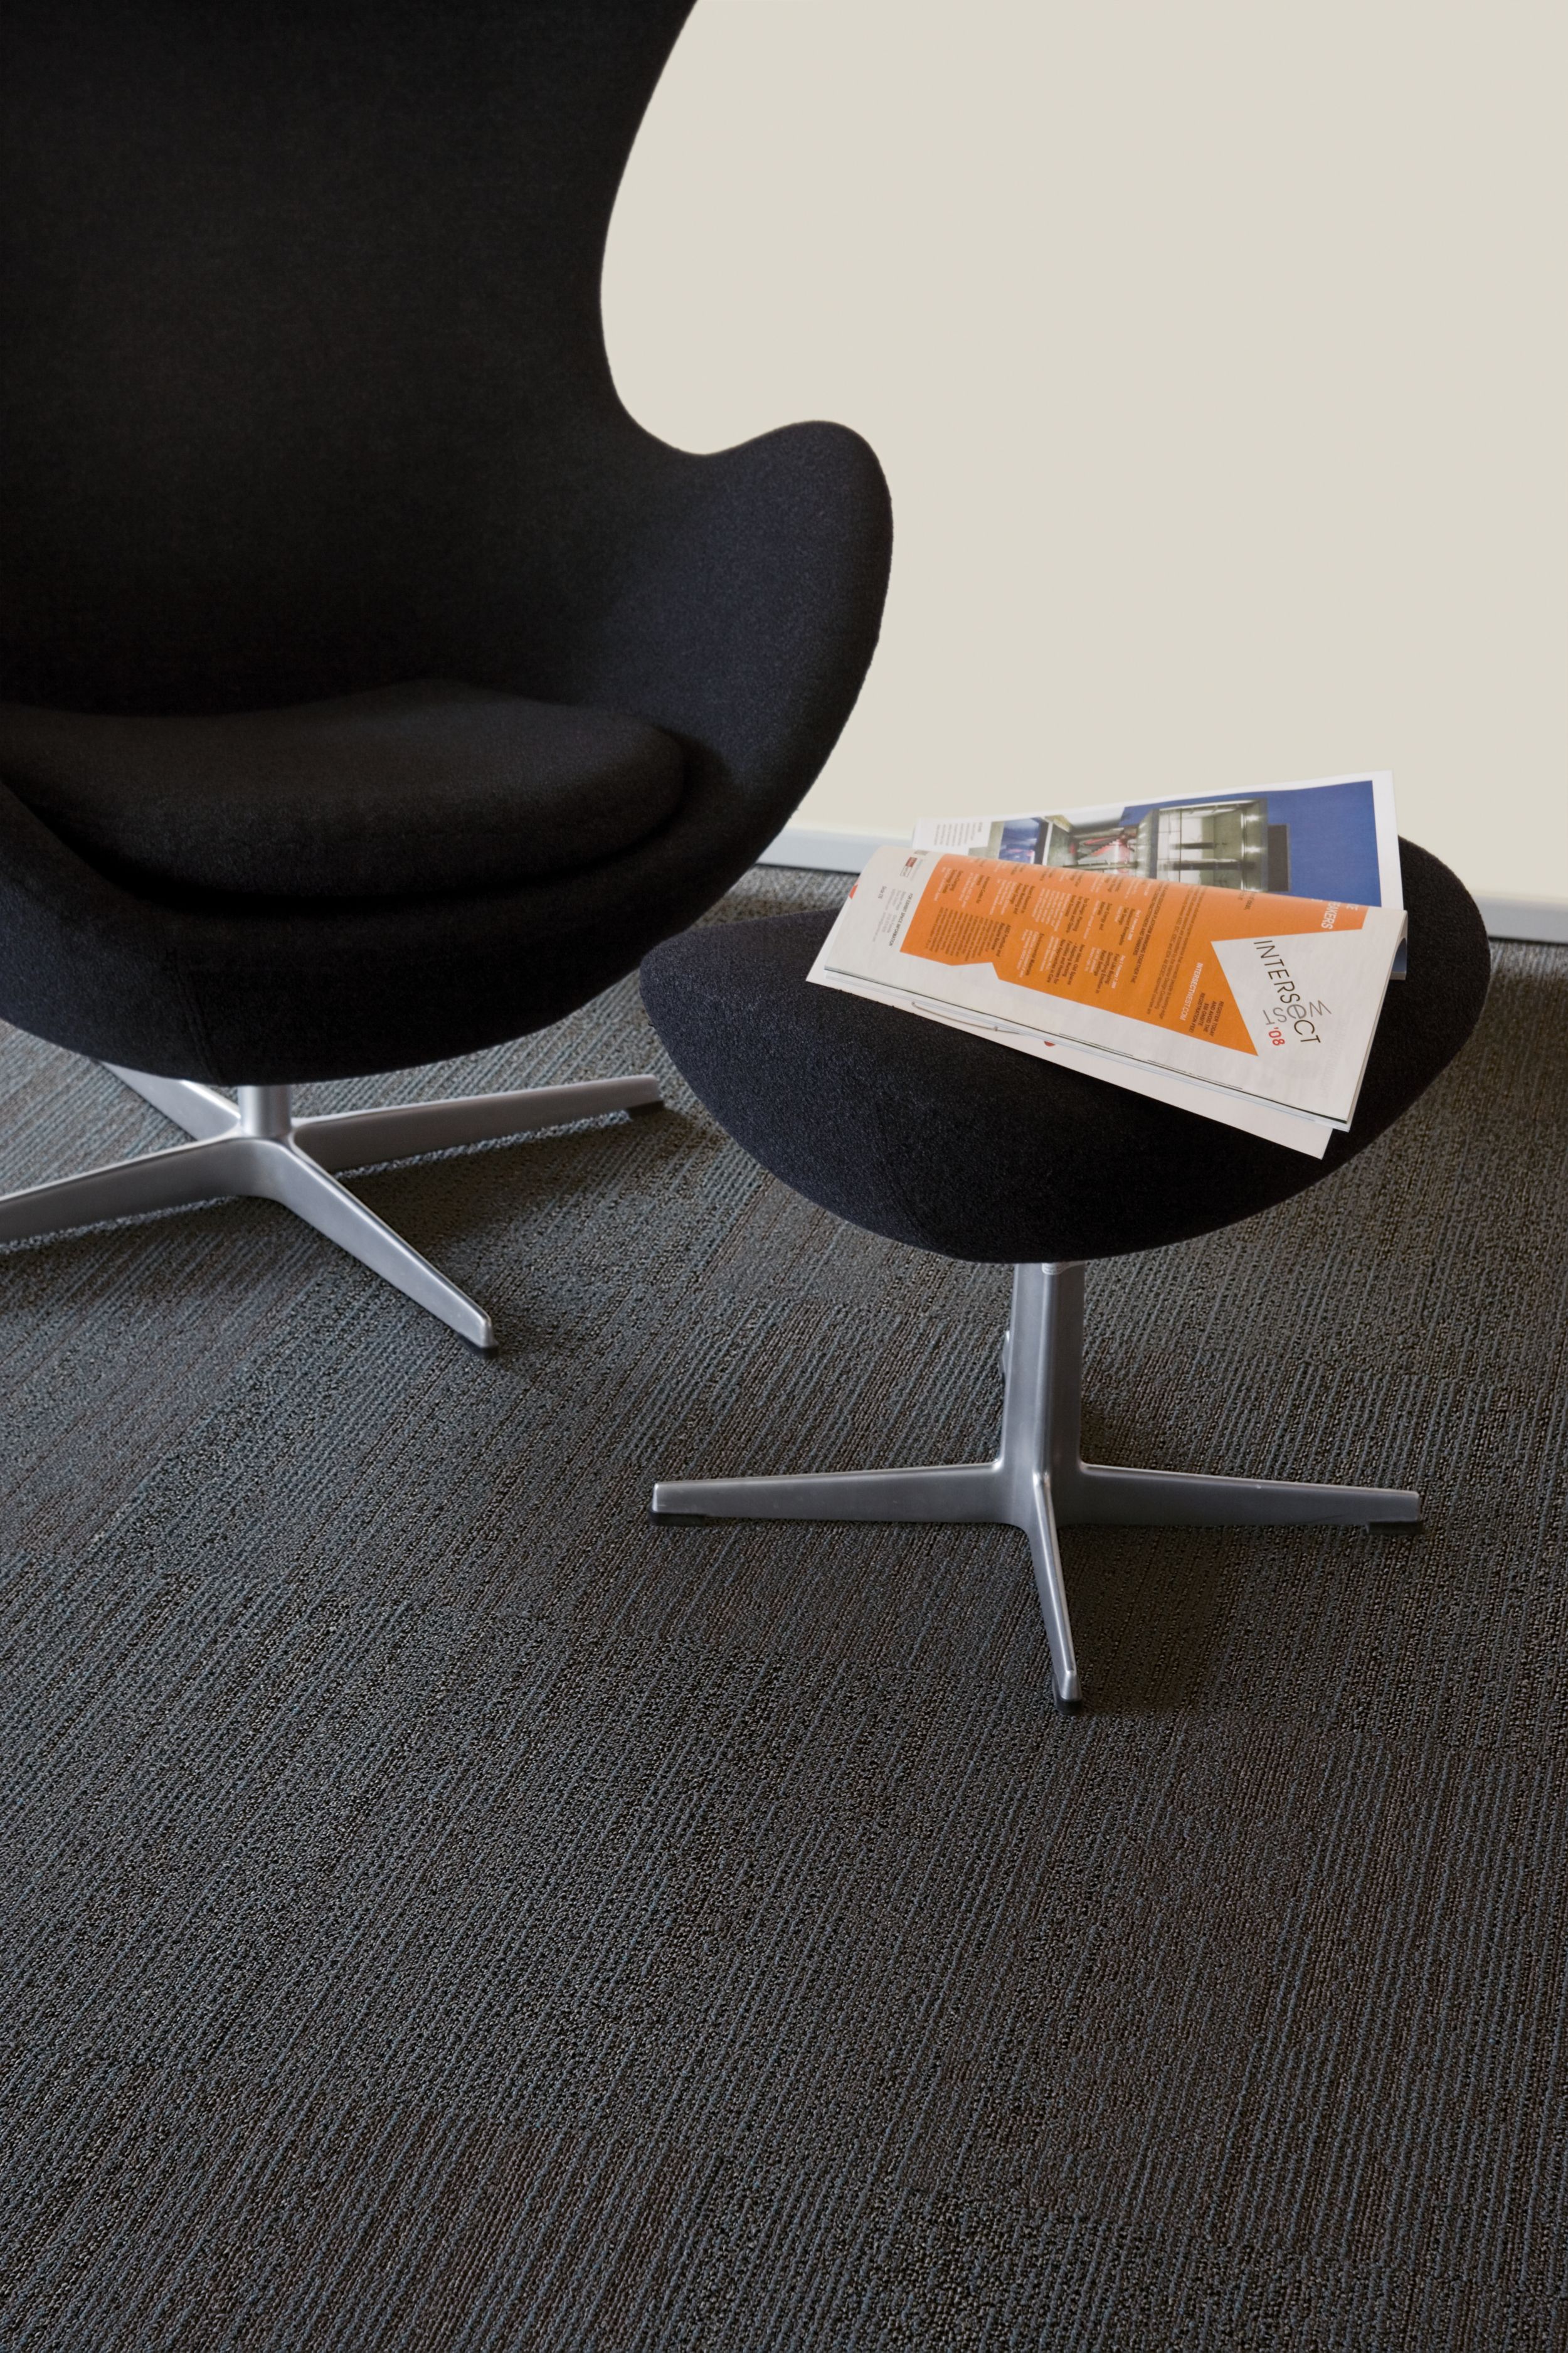 Detail of Interface San Roco carpet tile with chair and ottoman imagen número 7